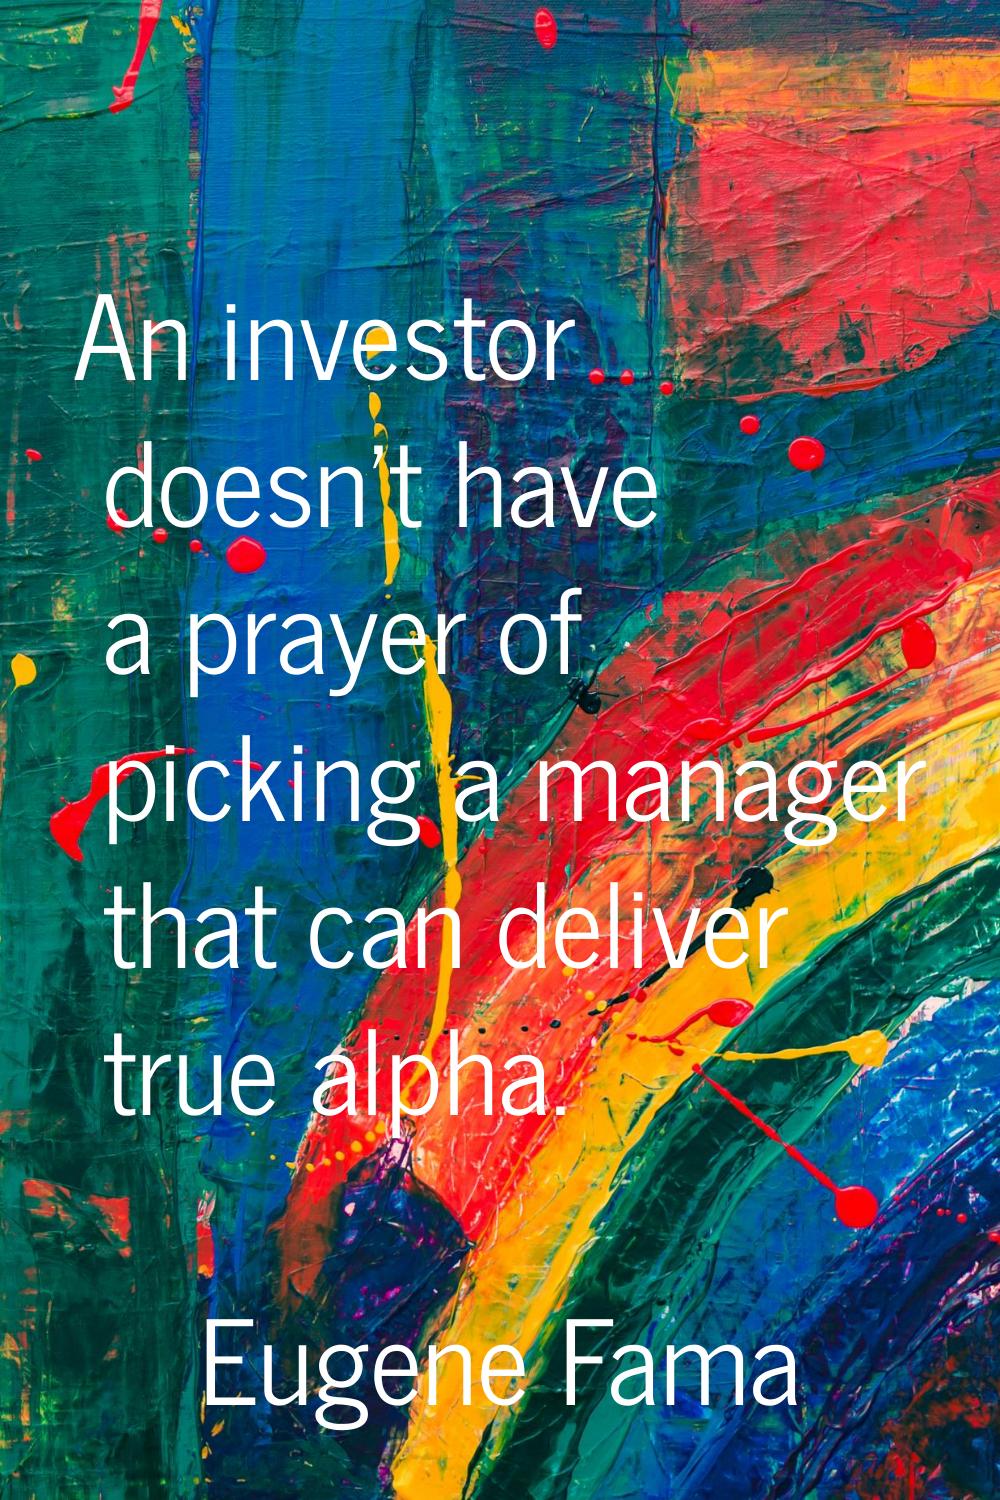 An investor doesn't have a prayer of picking a manager that can deliver true alpha.